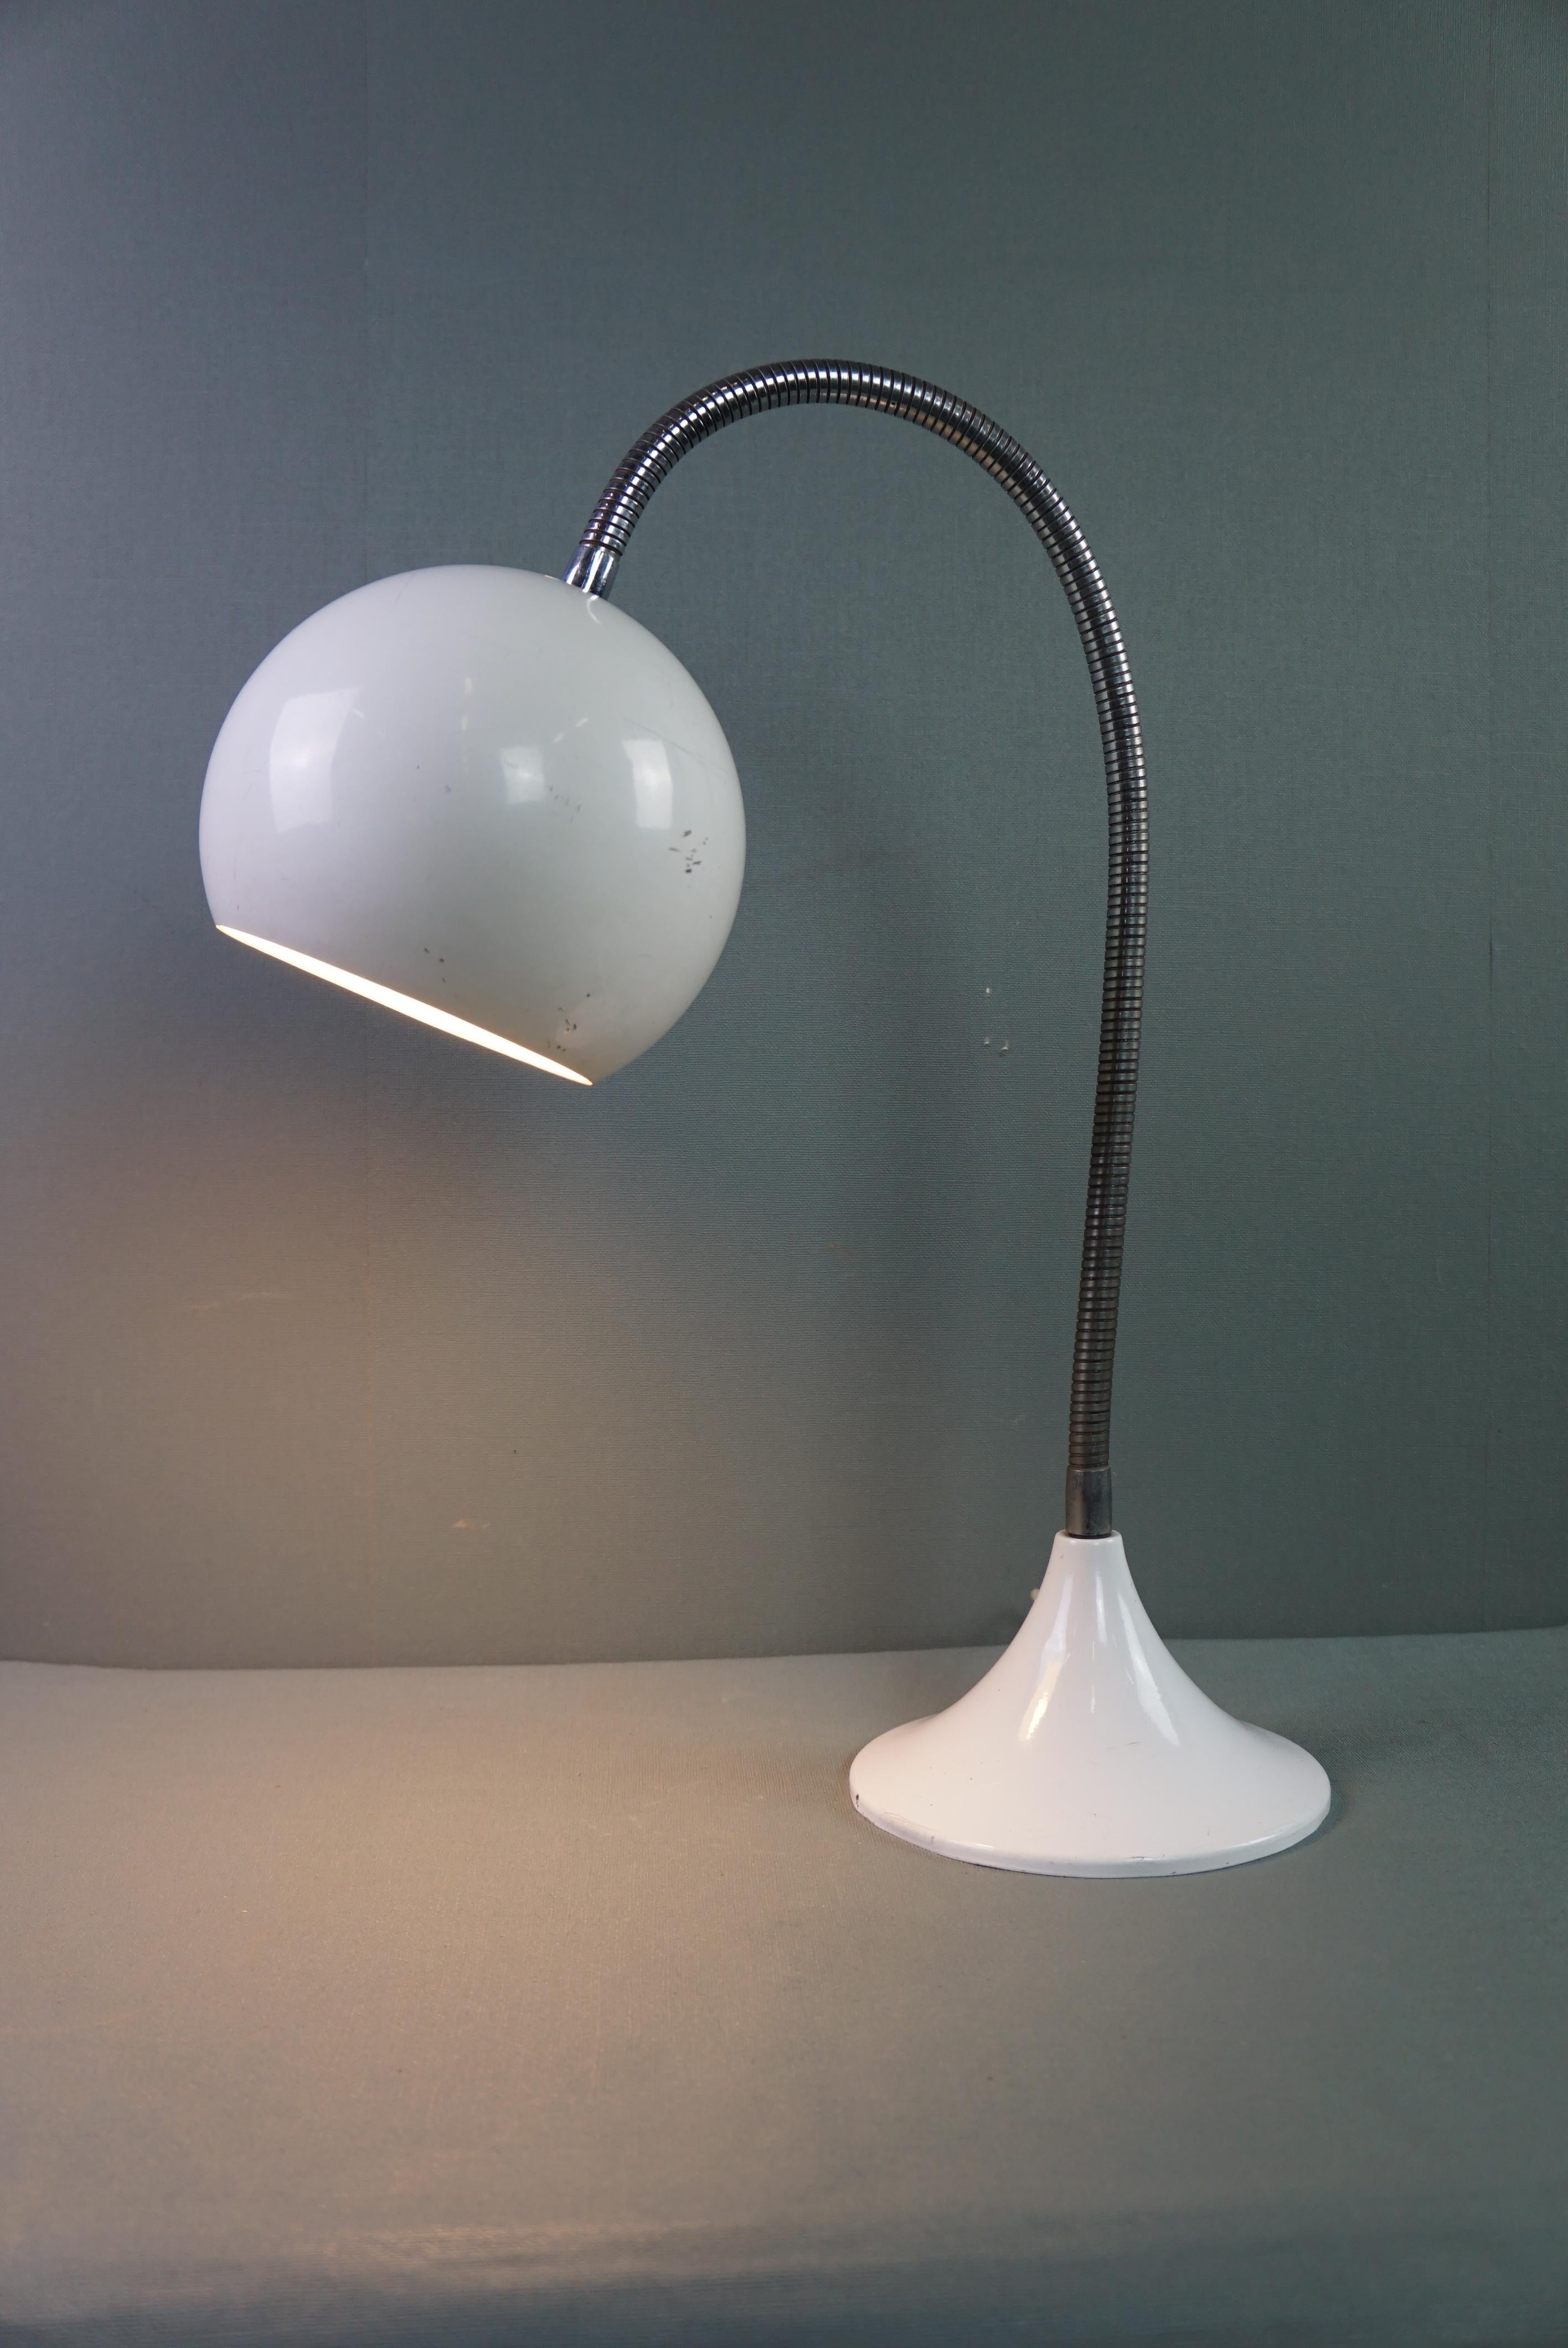 Offered is this vintage adjustable white desk lamp.

Add this beautifully shaped desk lamp with a bendable gooseneck to your collection. This item is perfect for your office, bedroom or family room.

This fixture has an E27 fitting (light source is